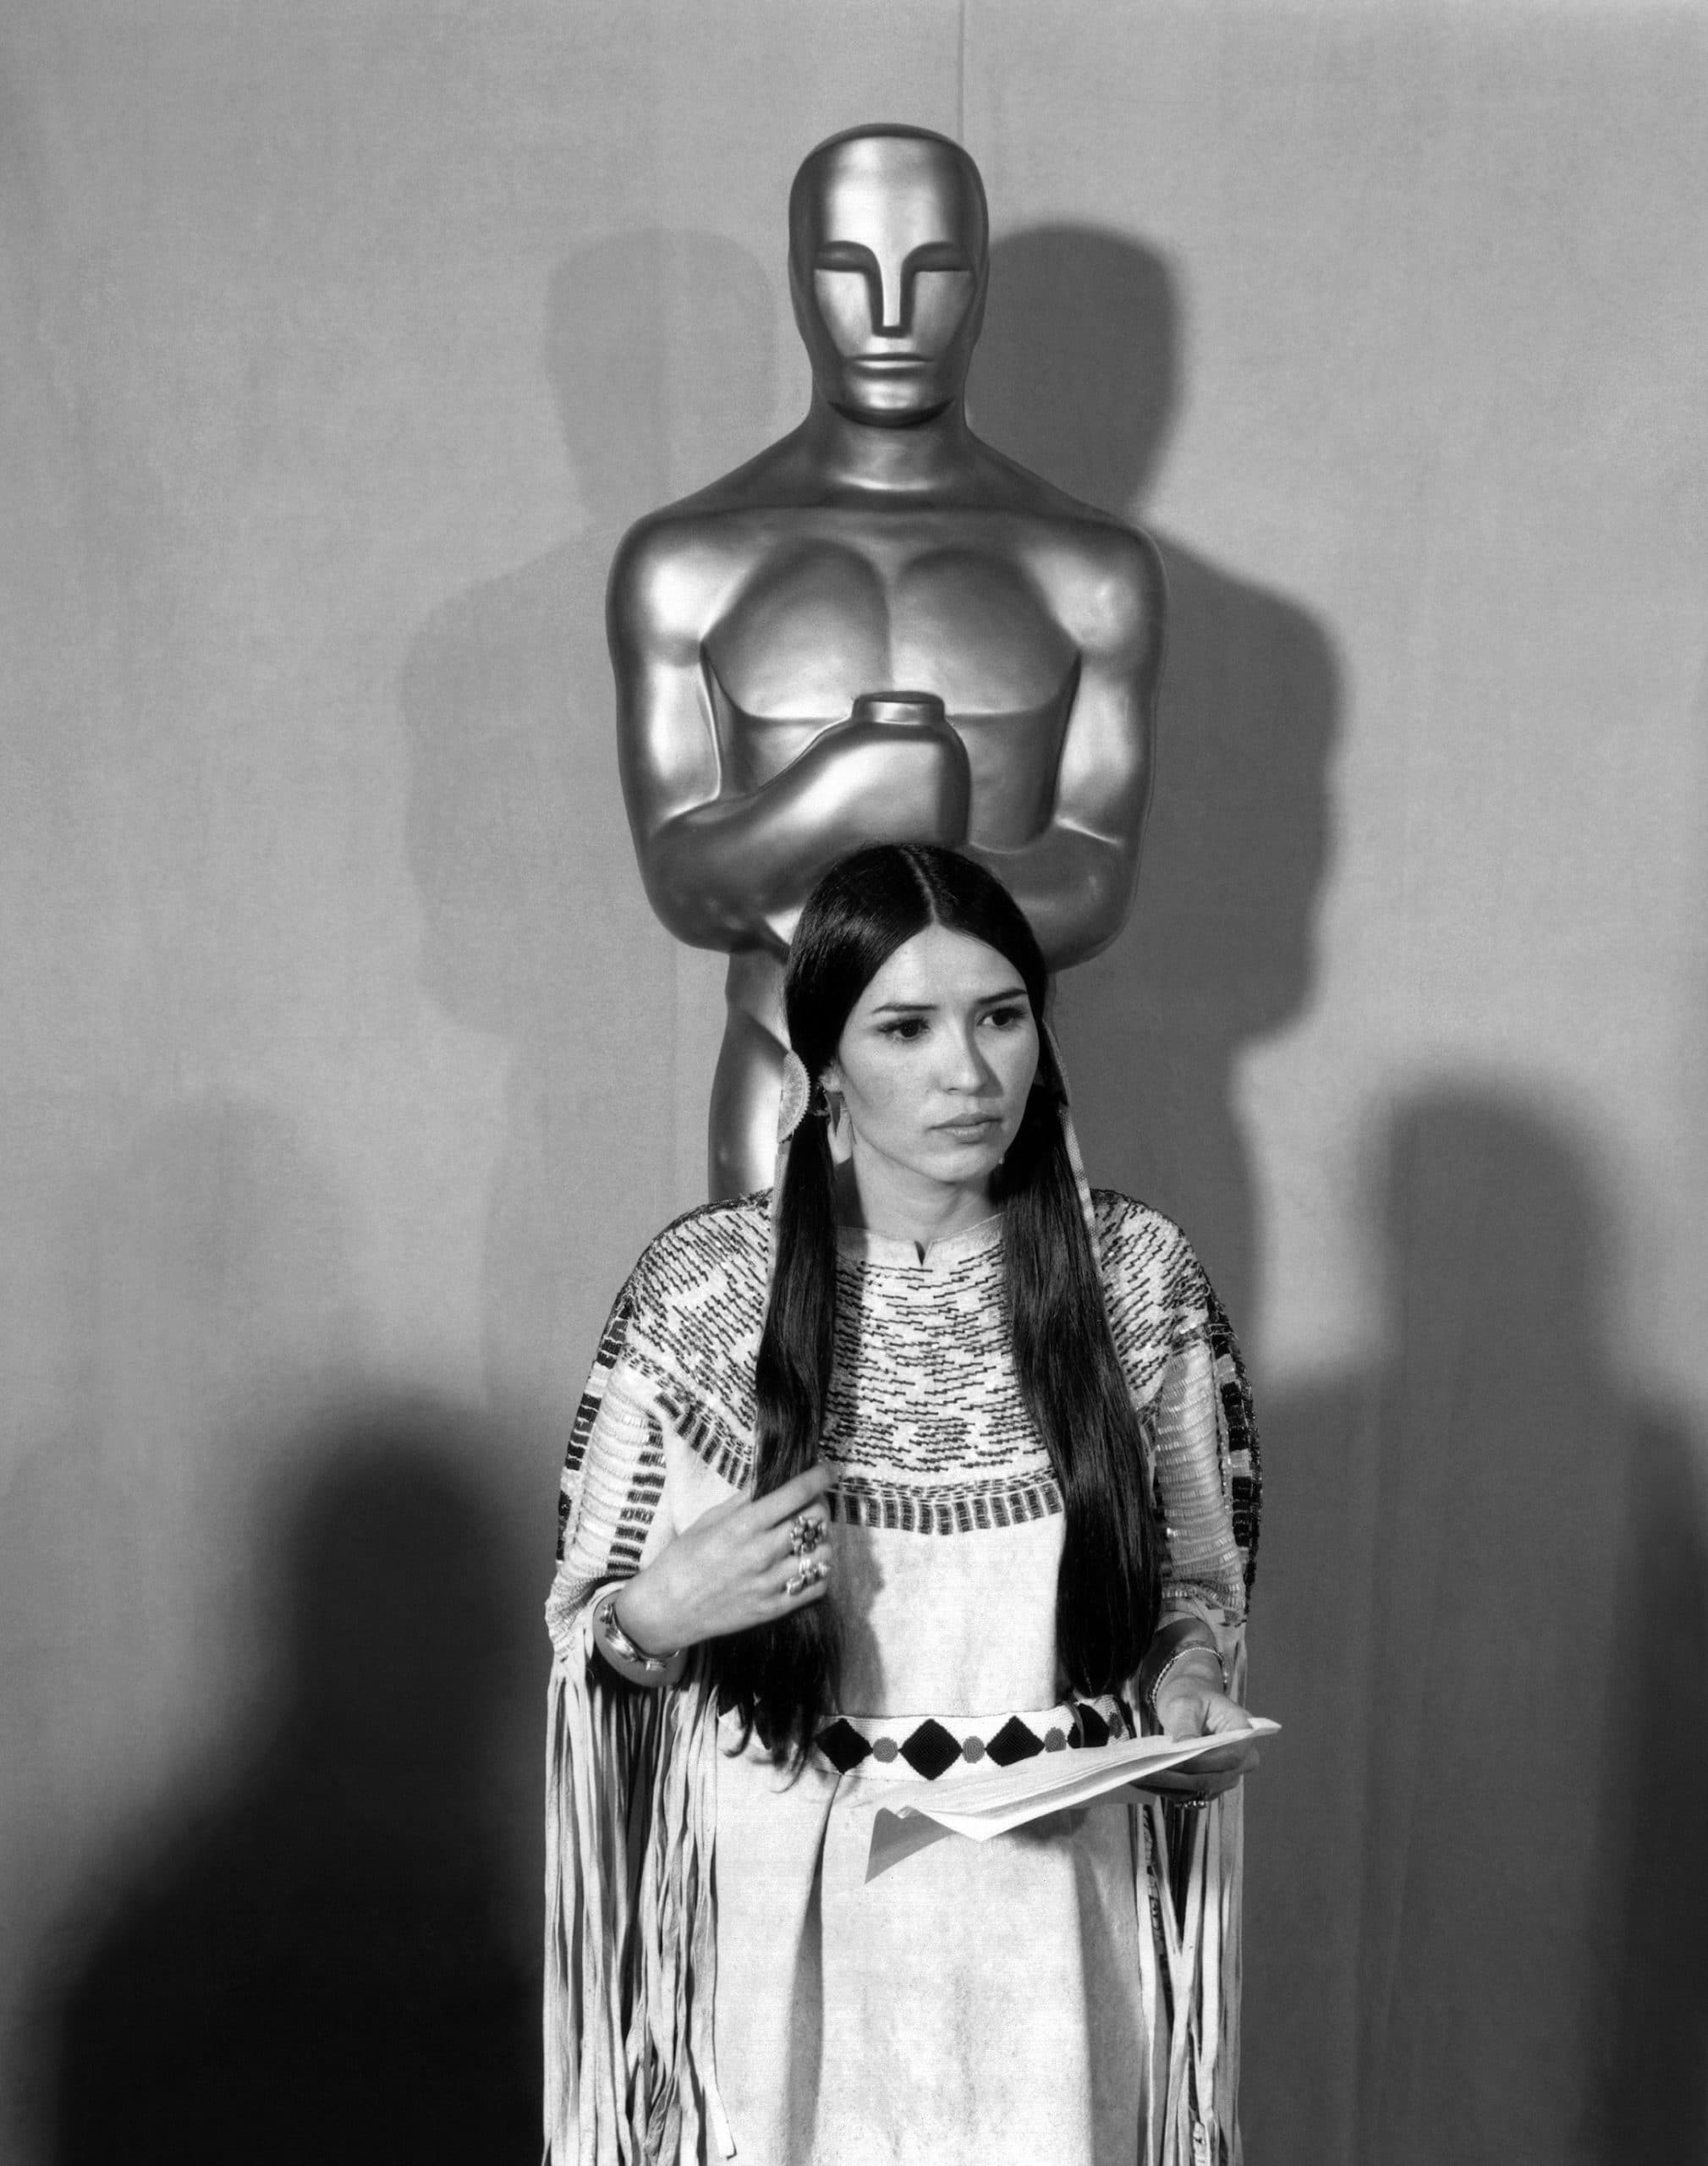 Sacheen Littlefeather holding Marlon Brando's speech refusing to accept his Academy Award for THE GODFATHER in front of a statue of the Academy Award, 1973